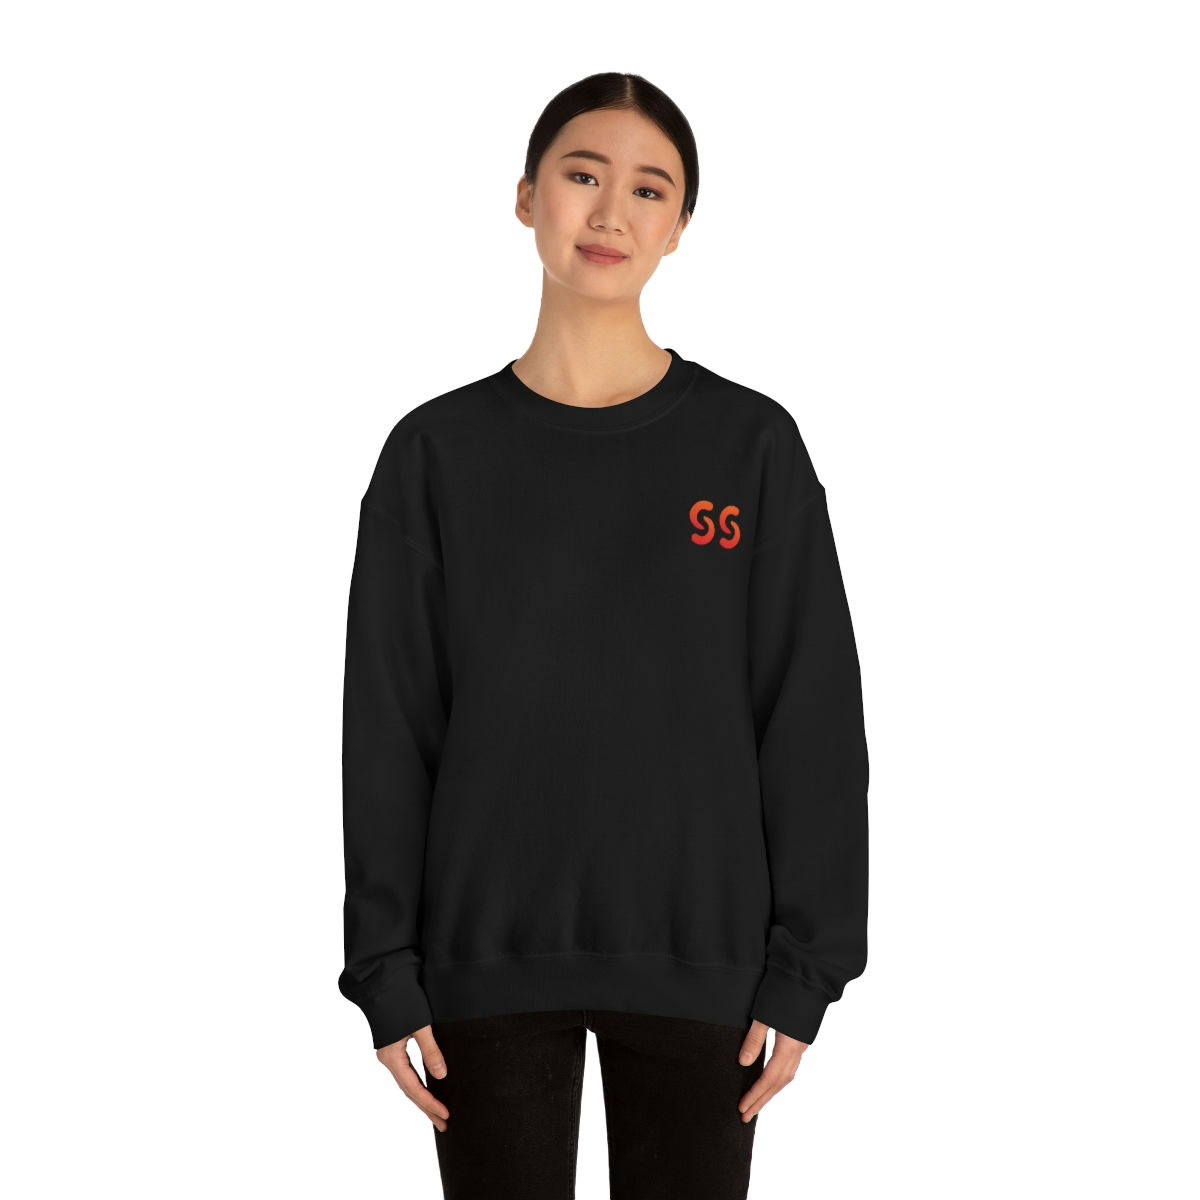 A young light skin tone female model wearing a black sweatshirt with stylized "SS" over the left breast denoting sickle cell trait status.